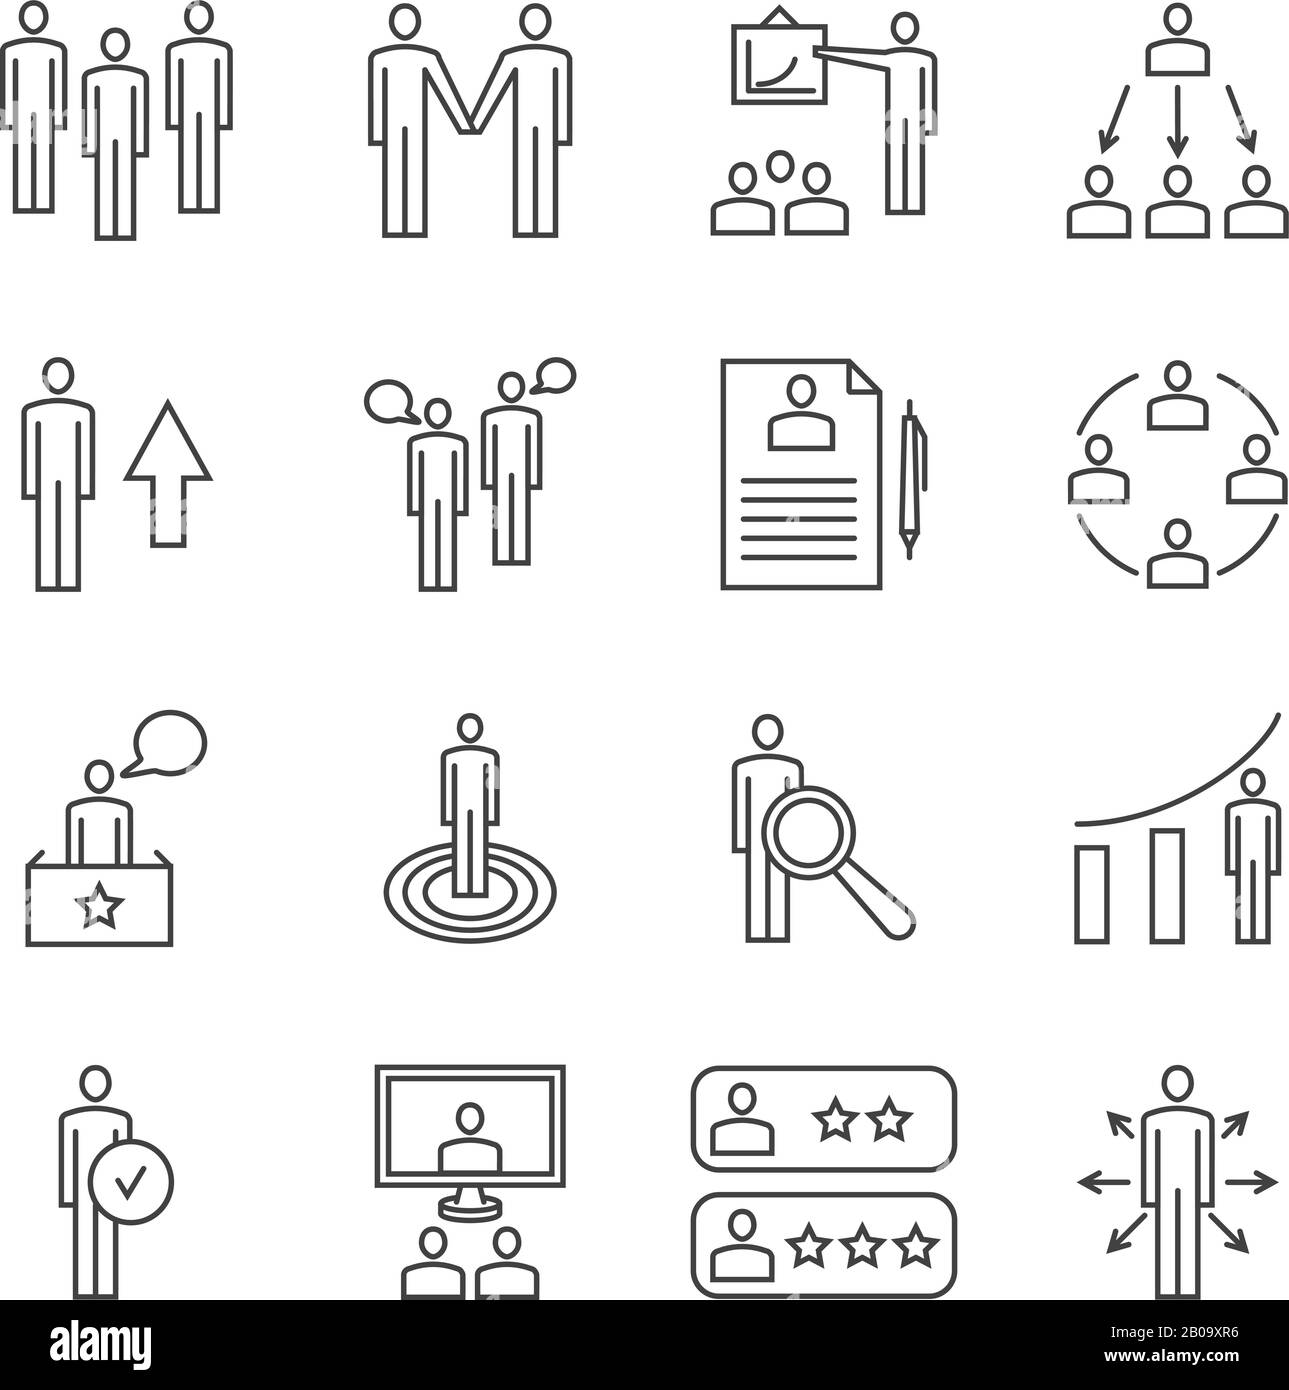 Team work line icons and management linear vector signs. Business management icons, illustration business teamwork Stock Vector